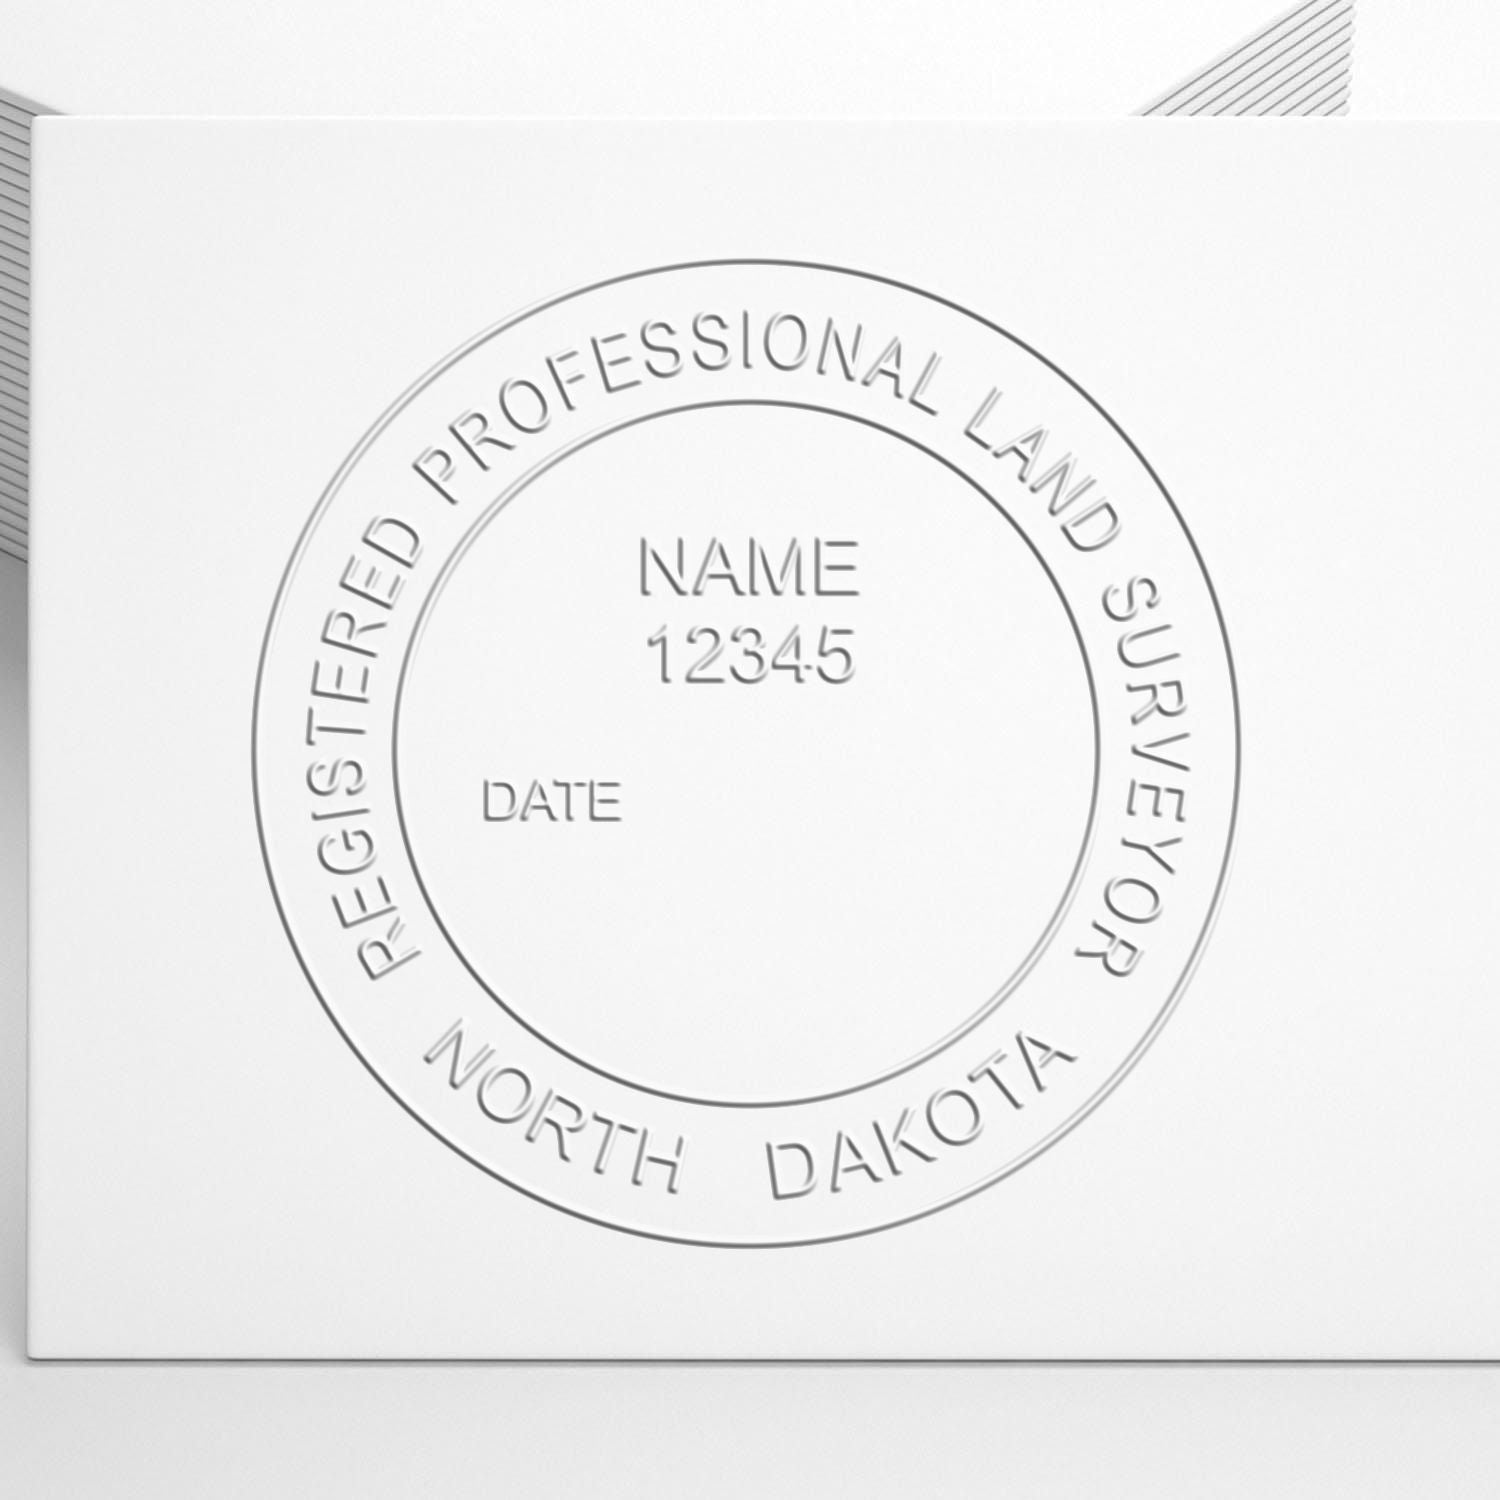 A stamped impression of the North Dakota Desk Surveyor Seal Embosser in this stylish lifestyle photo, setting the tone for a unique and personalized product.